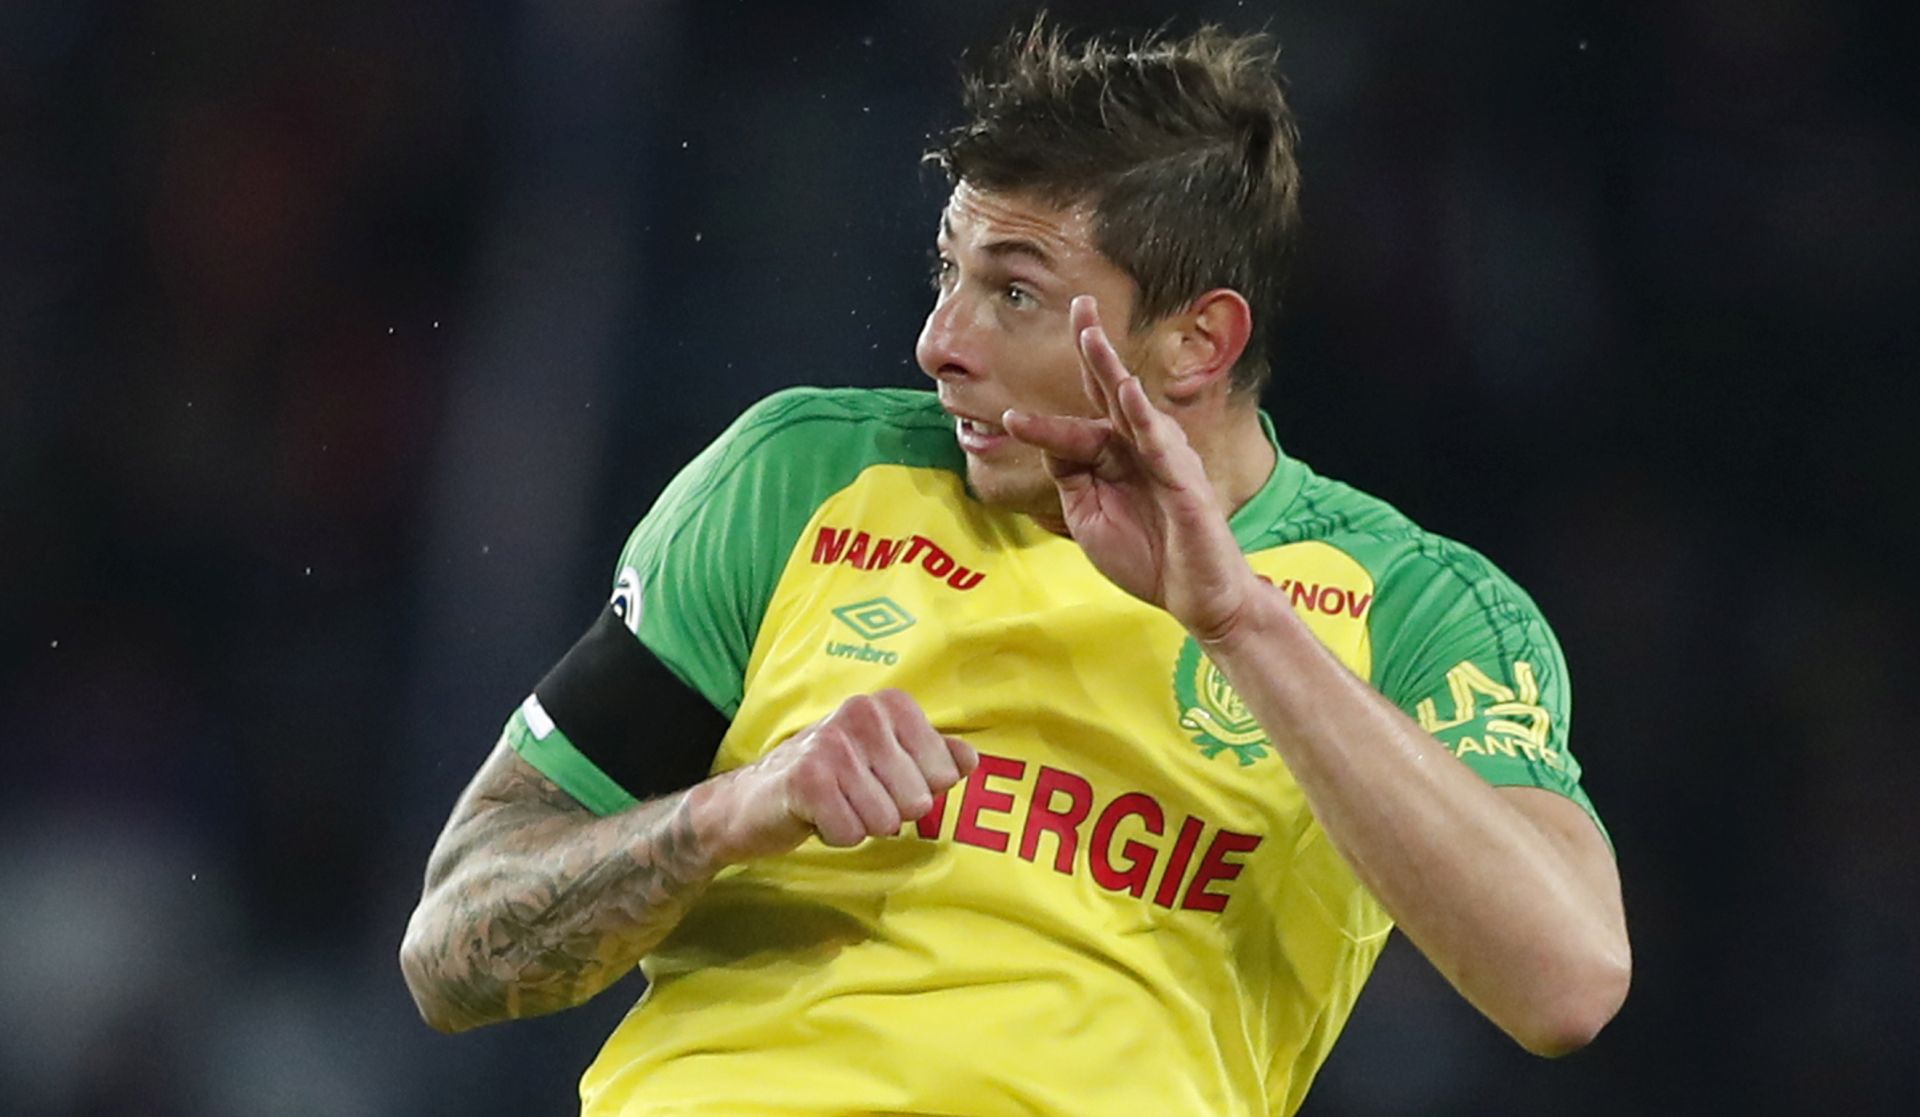 epa07308826 (FILE) - Argentine soccer player Emiliano Sala in action during the soccer ligue 1 match between Paris Saint Germain and FC Nantes in Paris, France, 18 November 2017 (reissued 22 January 2019). According to media reports, French authorities have confirmed that Cardiff City soccer player Emiliano Sala was on board of a light plane which has disappeared on its way from France to the UK.  EPA/IAN LANGSDON